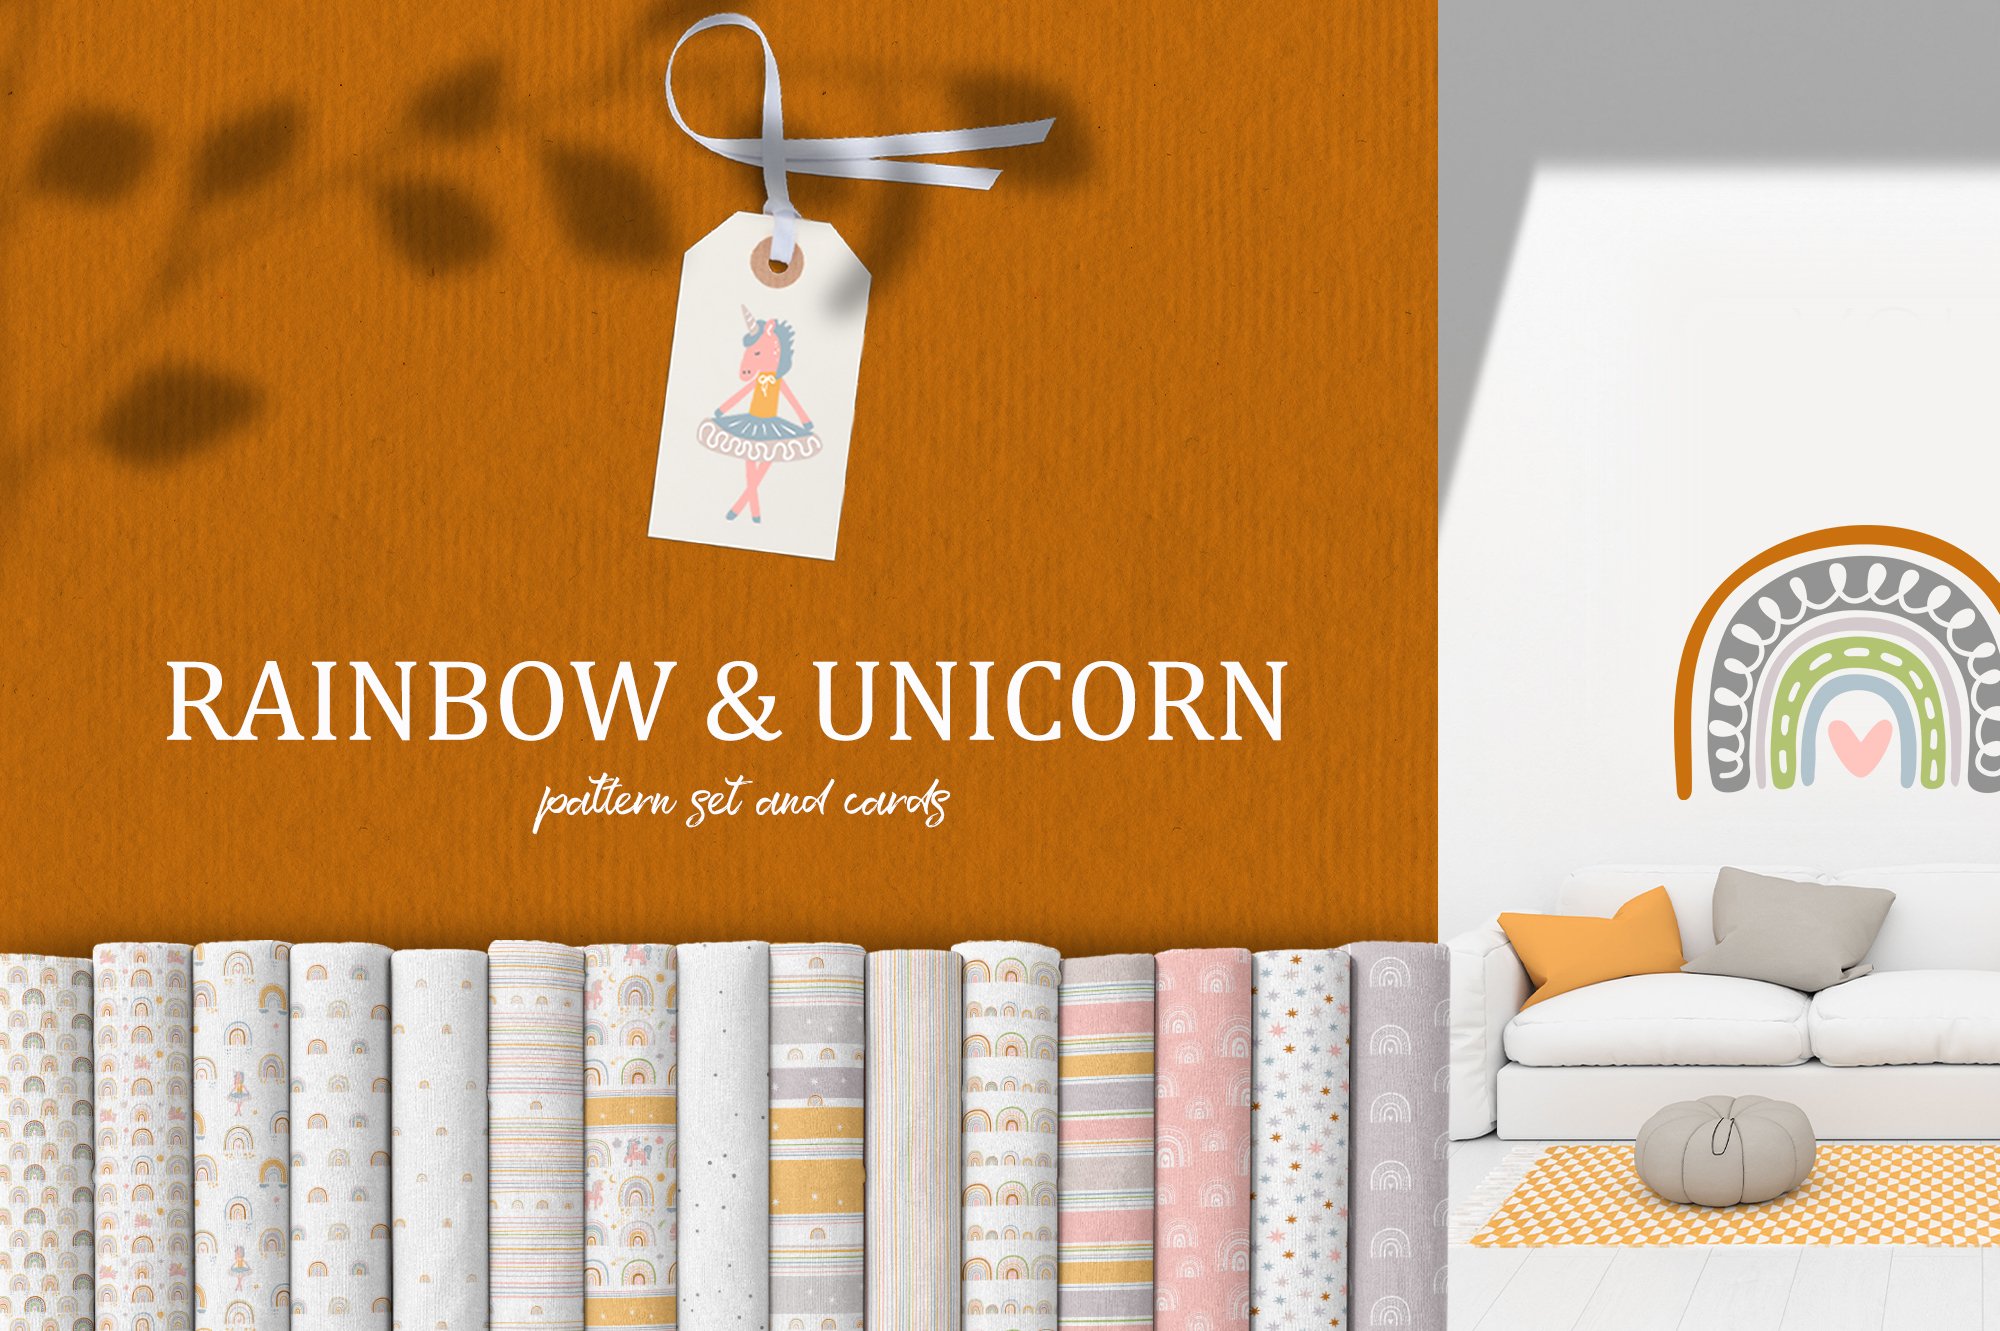 Rainbows & Unicorns collections preview image.